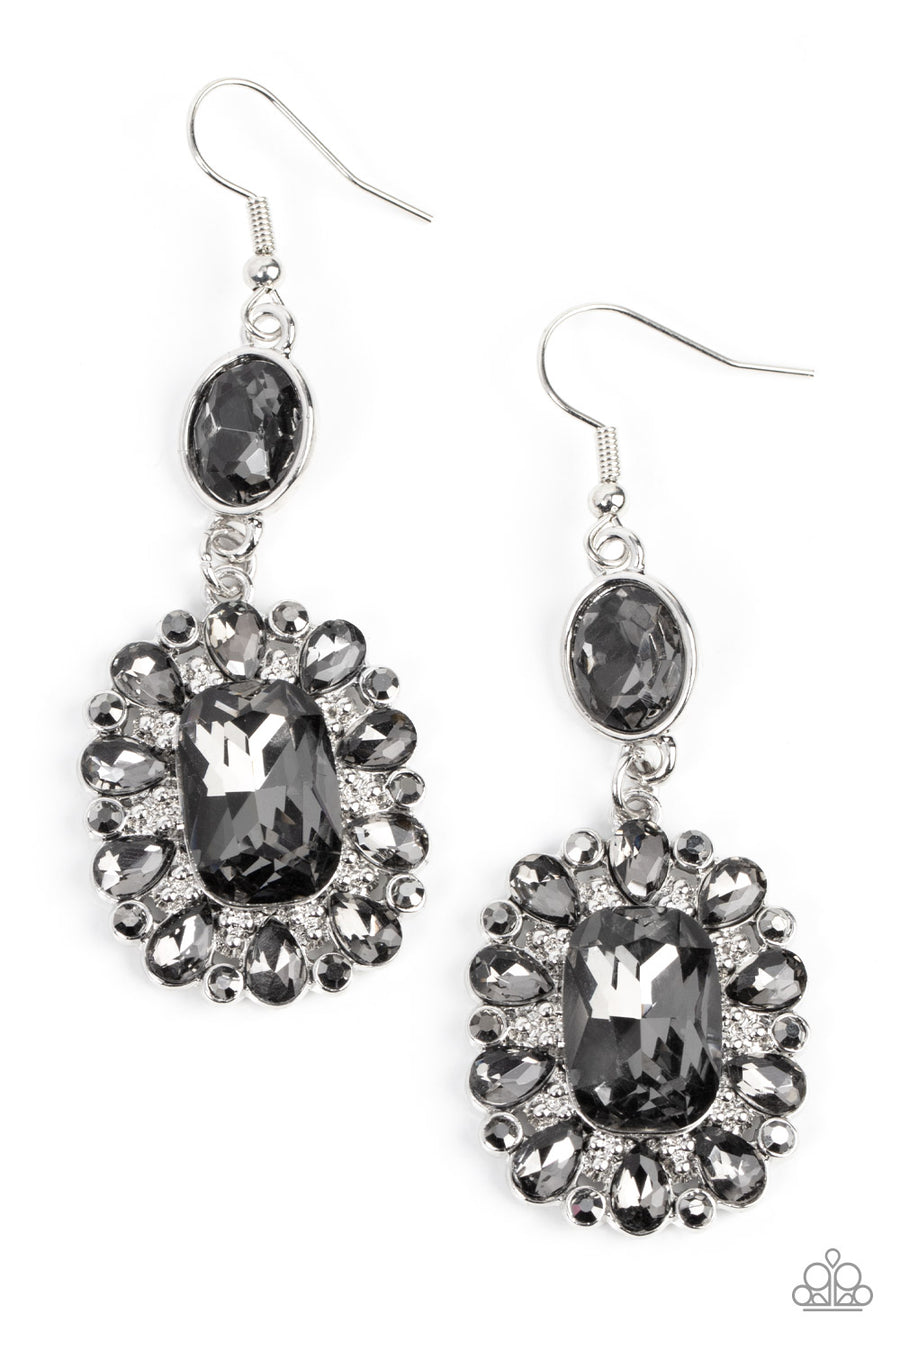 Capriciously Cosmopolitan - Silver Gem Earrings - Paparazzi Accessories - Dainty hematite rhinestones and teardrop smoky gems fan out from an oversized smoky emerald cut gem at the bottom of a solitaire oval smoky gem, resulting in a glamorously glitzy lure. Earring attaches to a standard fishhook fitting.